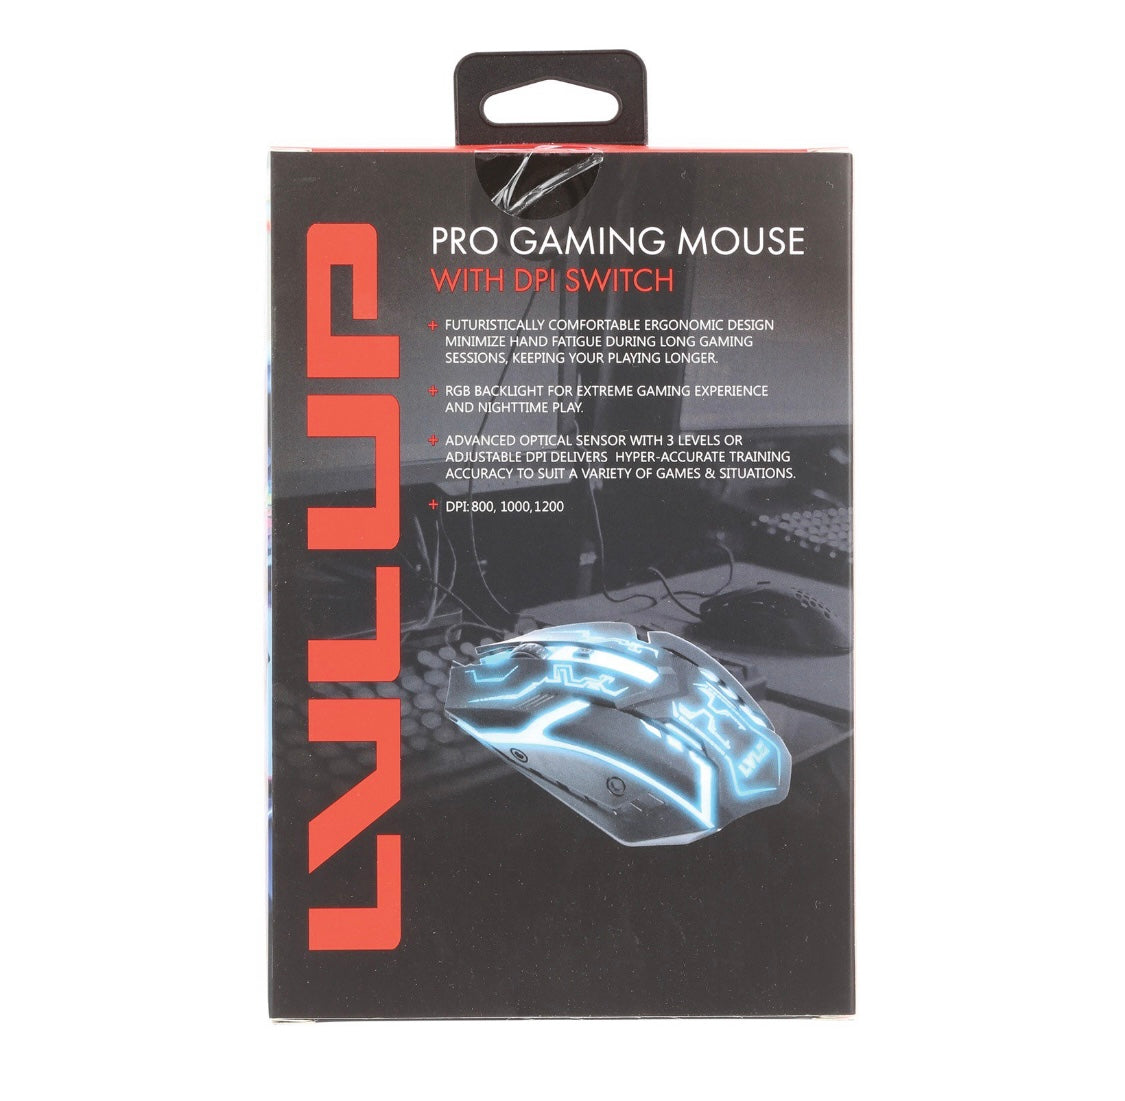 Pro Gaming Mouse With DPI Switch